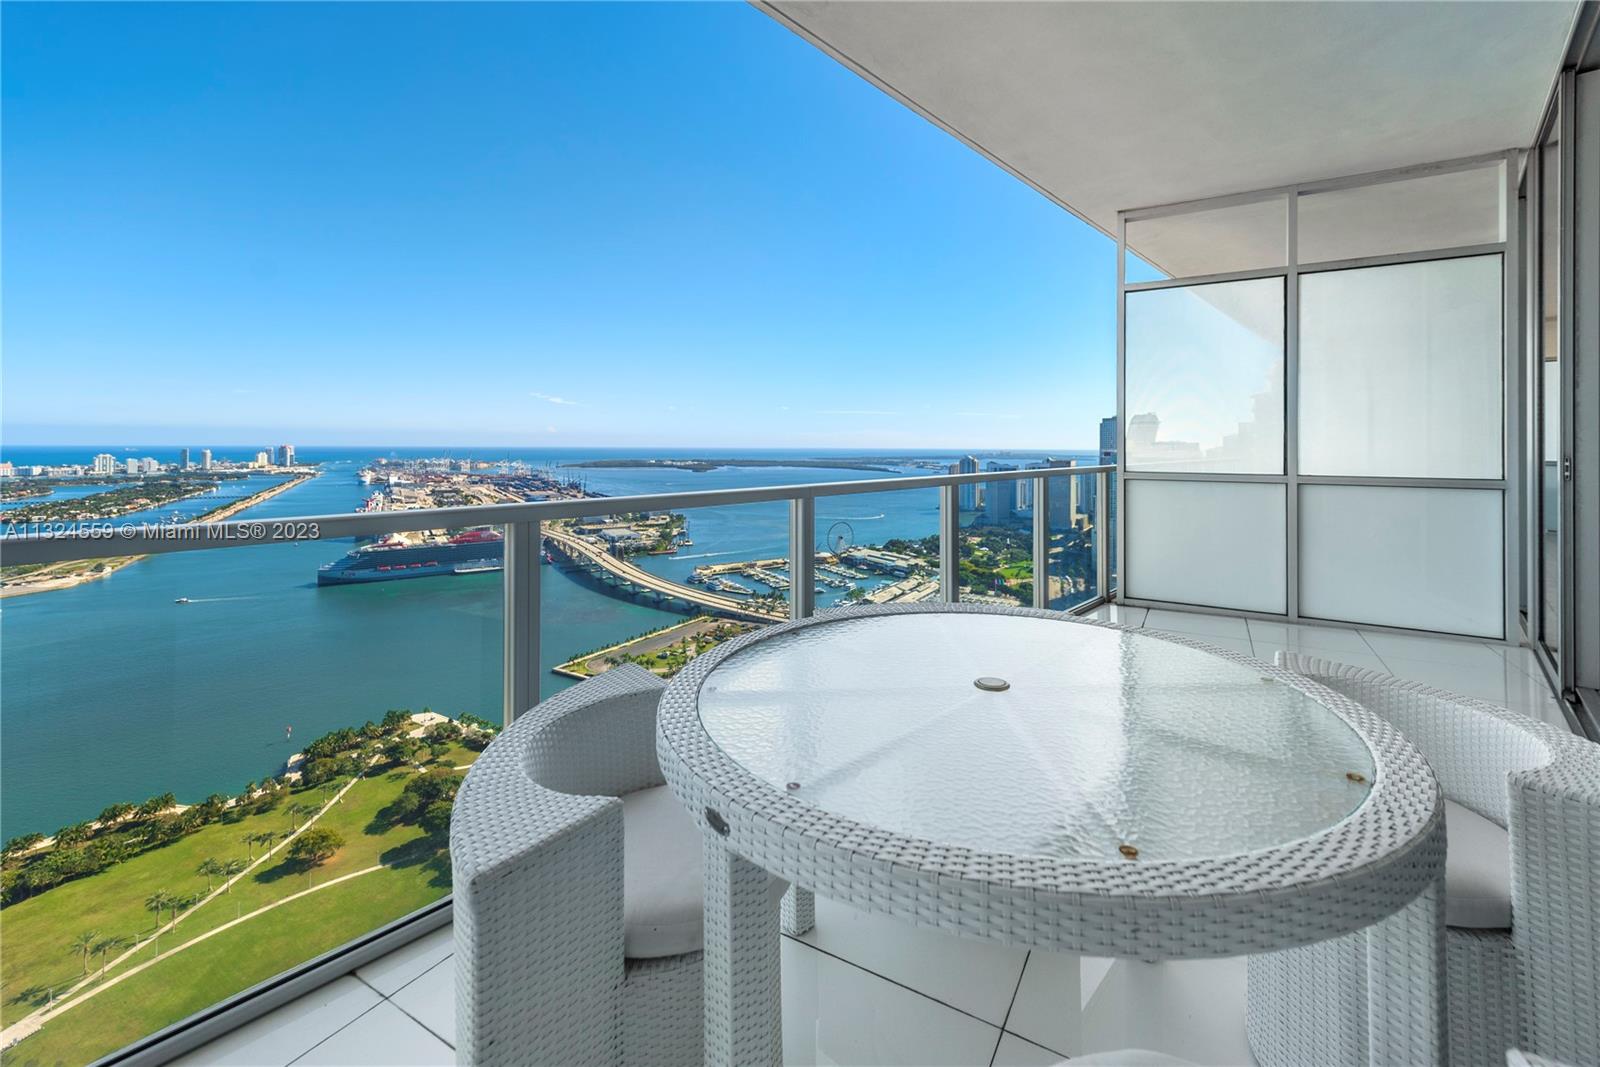 2 Beds , 2 Baths w/ 1,477 square feet of space. Enjoy endless views from the 57th Floor of the Open Bay and Ocean.  Professional Kitchen w/ Viking Appliances. Steps to Miami's deep culture, Adrienne Arsht Performing Arts Center, Frost Science Museum and Perez Art Museum. Minutes to South Beach and Miami Airport. Luxury Full Service, Security Building. Special UNIT! Easy to show.